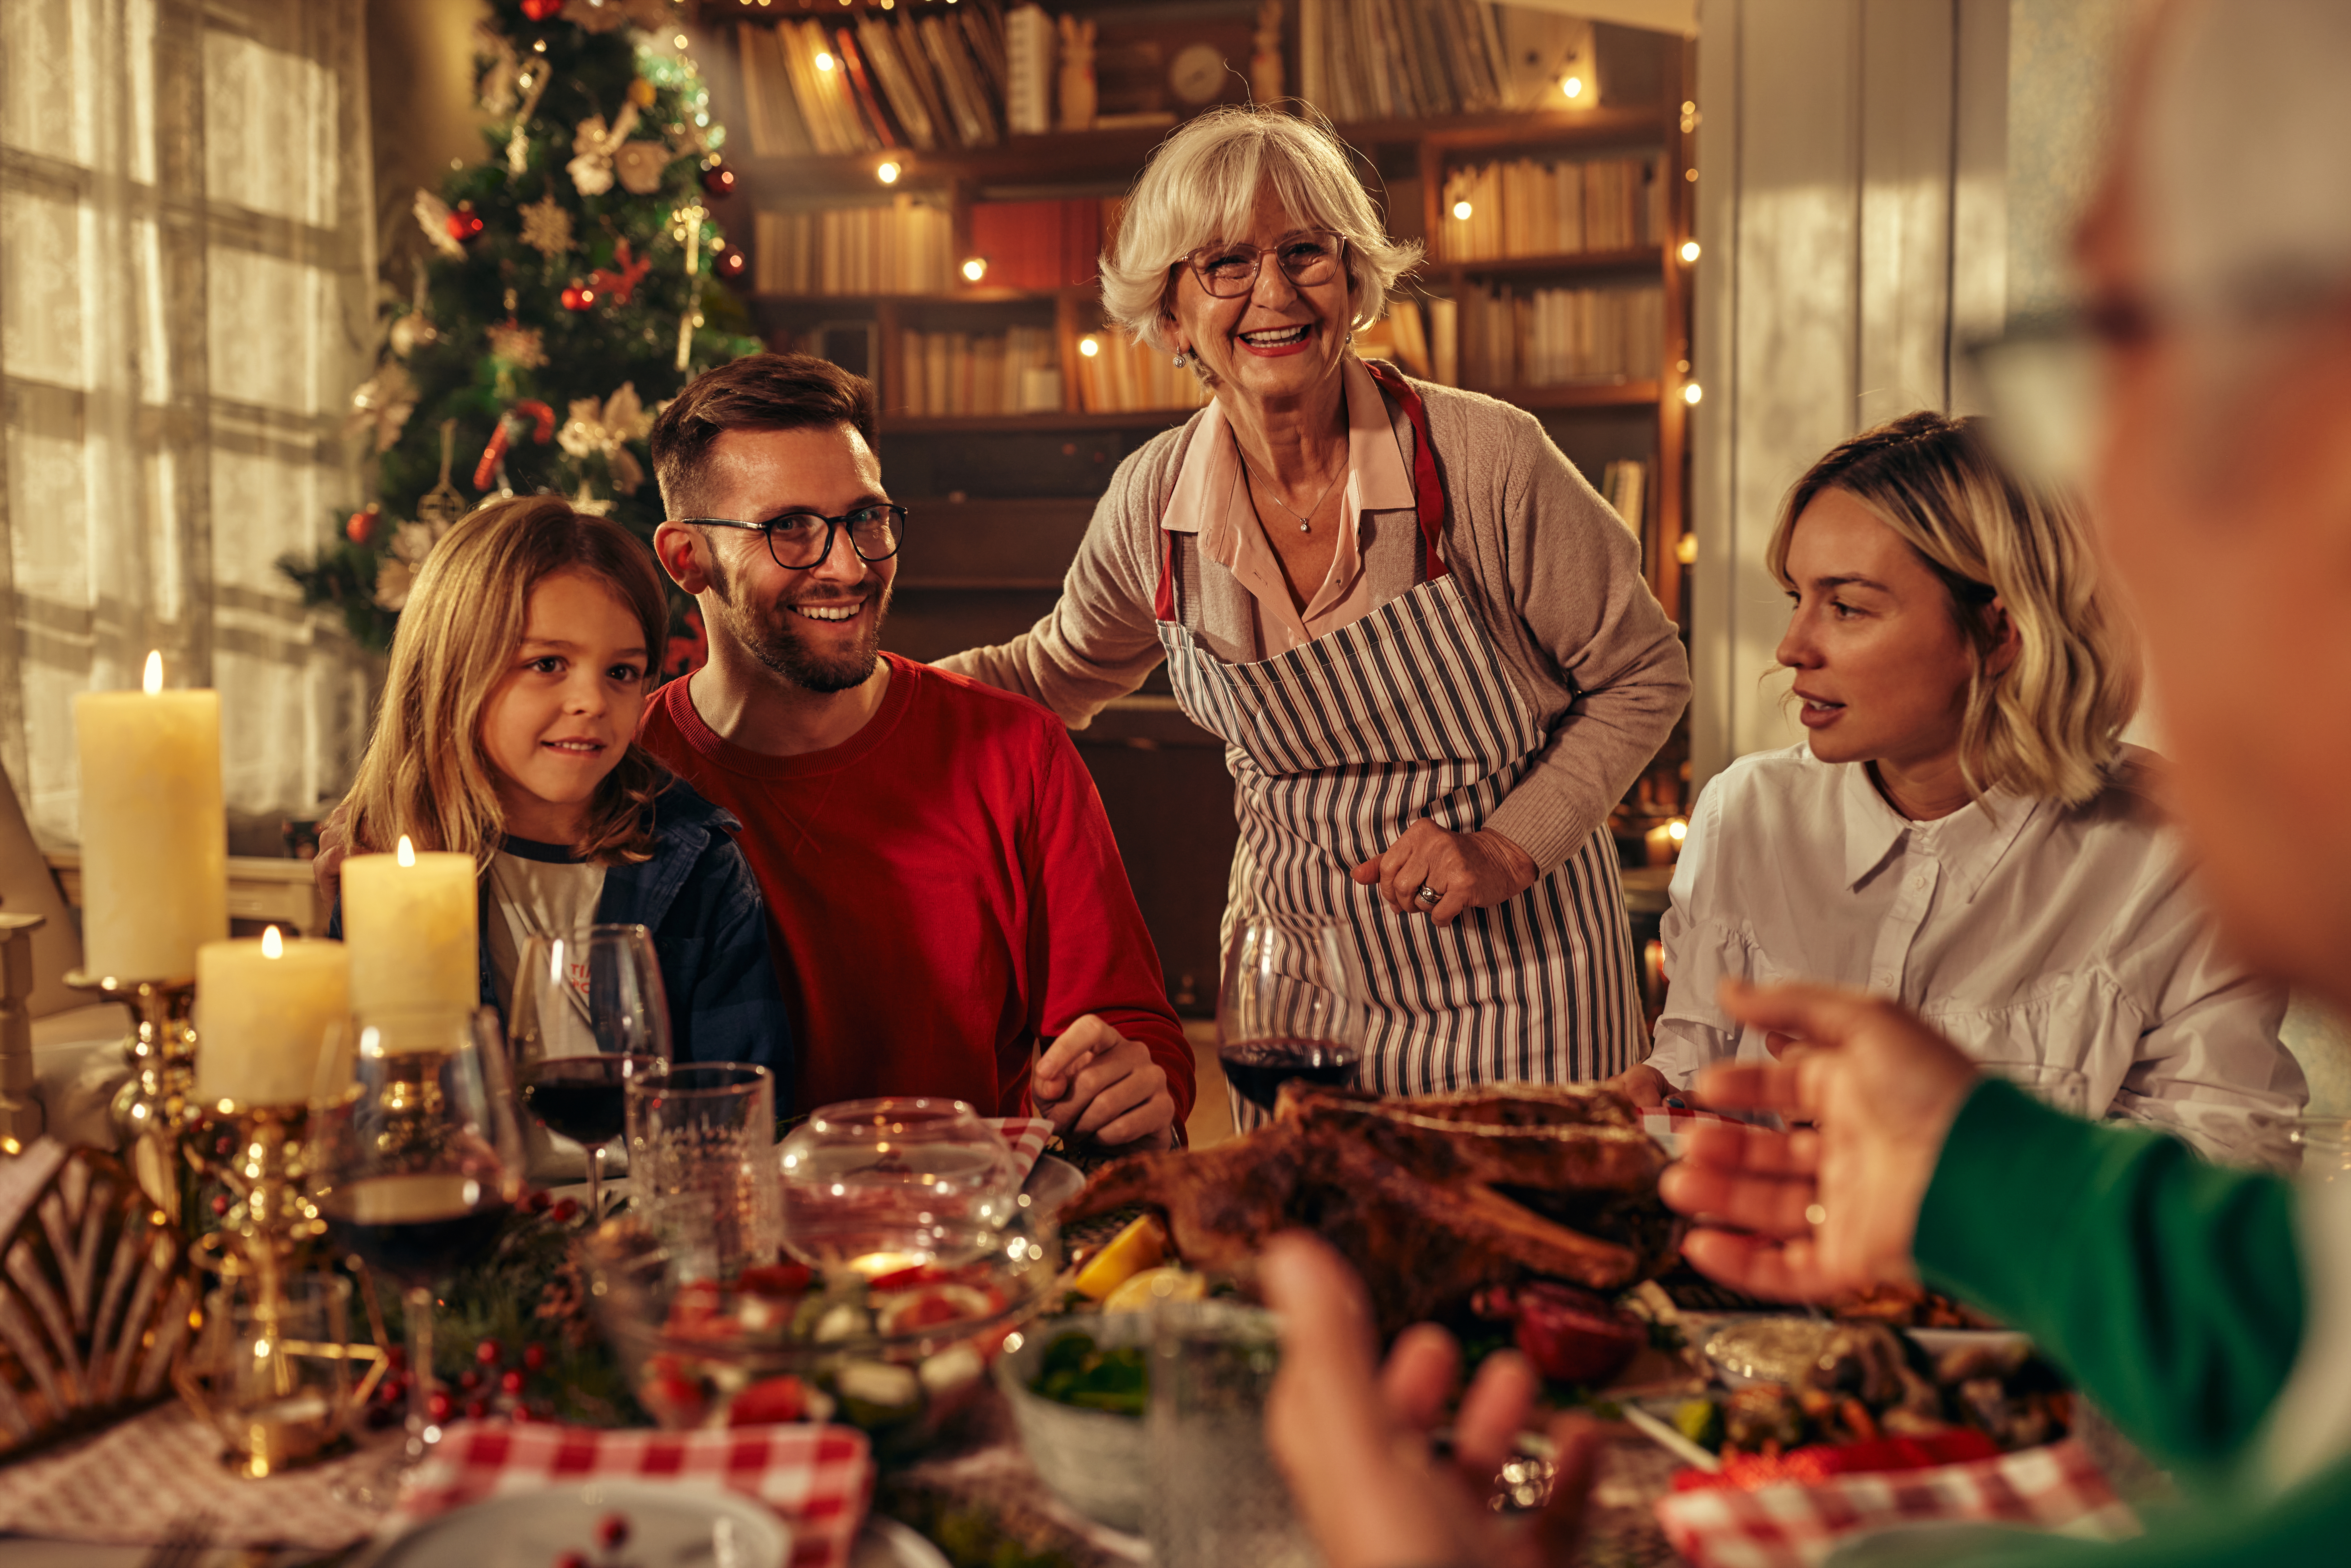 Family members gathered for a Christmas supper party | Source: Shutterstock